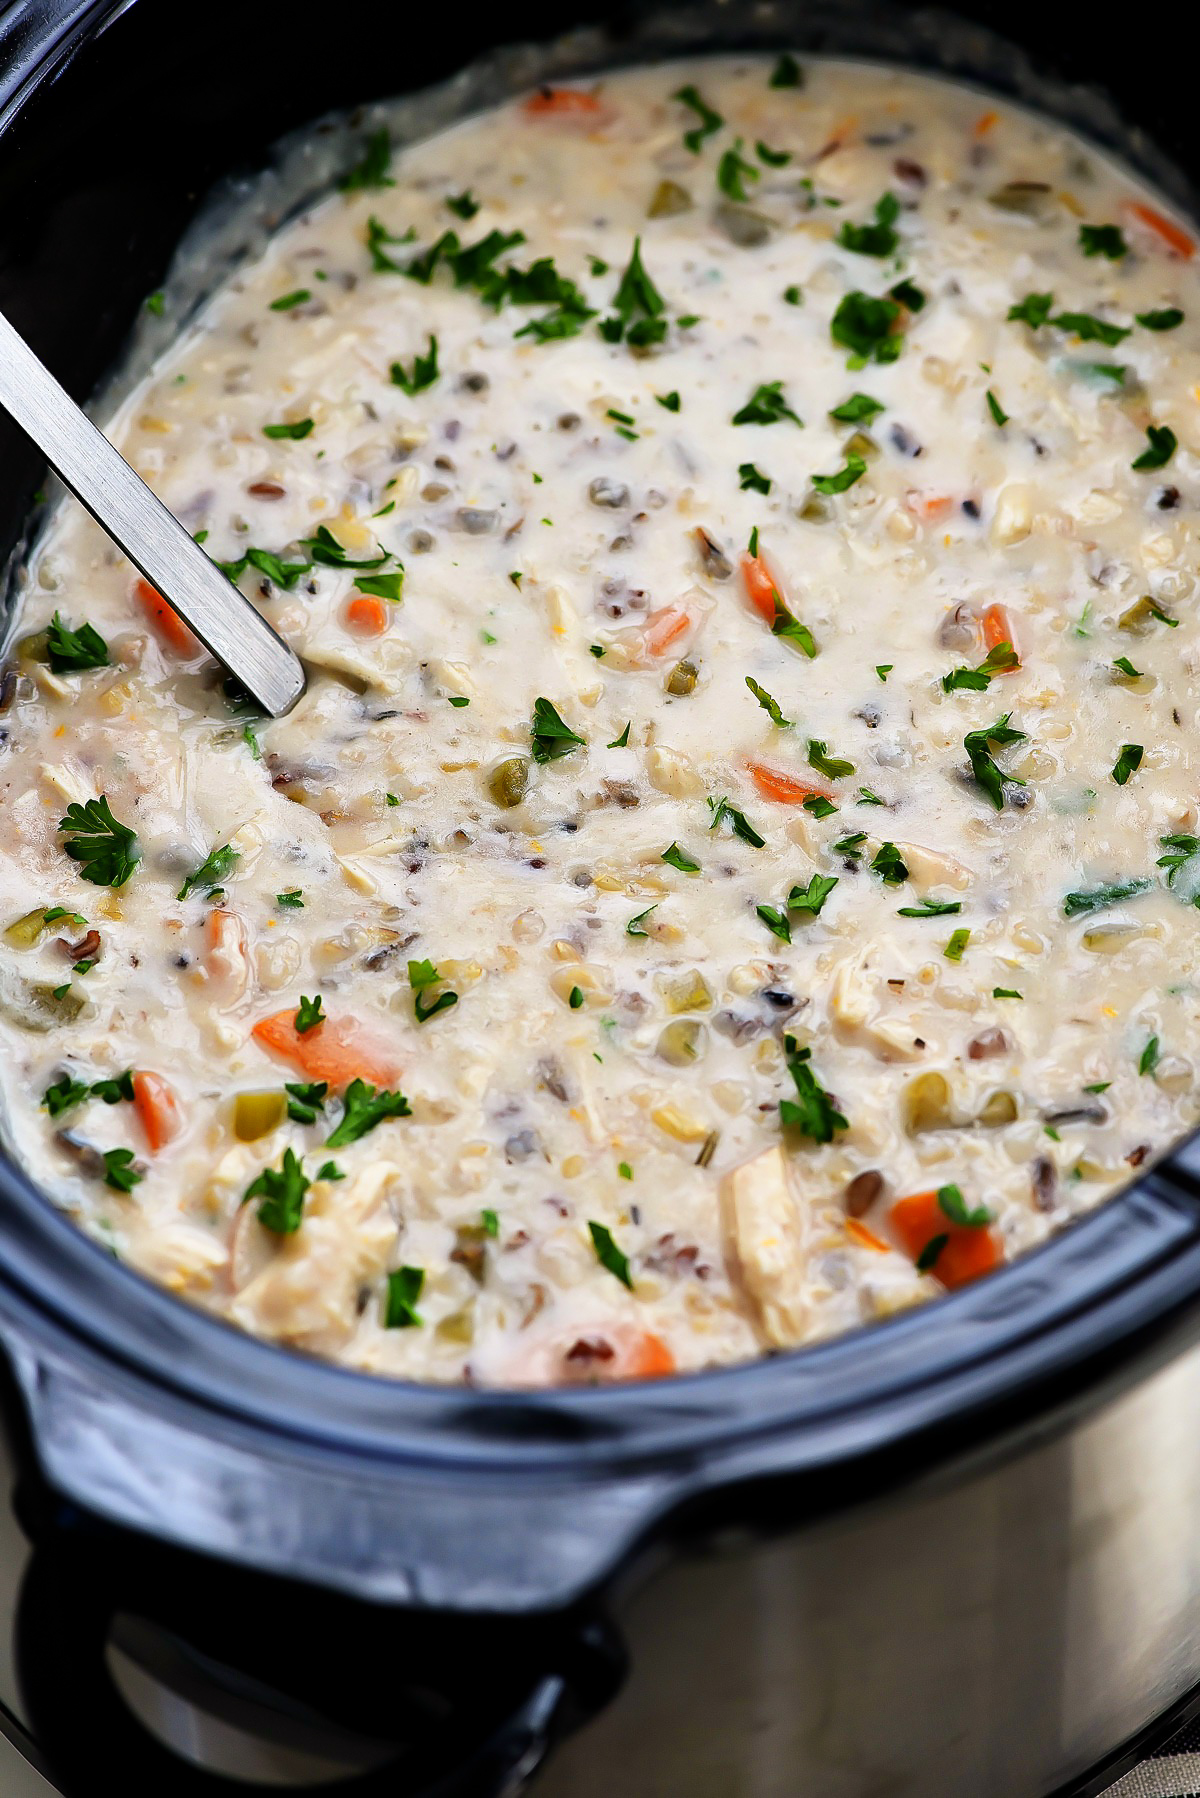 Crock Pot Chicken wild rice soup is a flavorful, hearty soup with veggies, rice and chicken. Life-in-the-Lofthouse.com